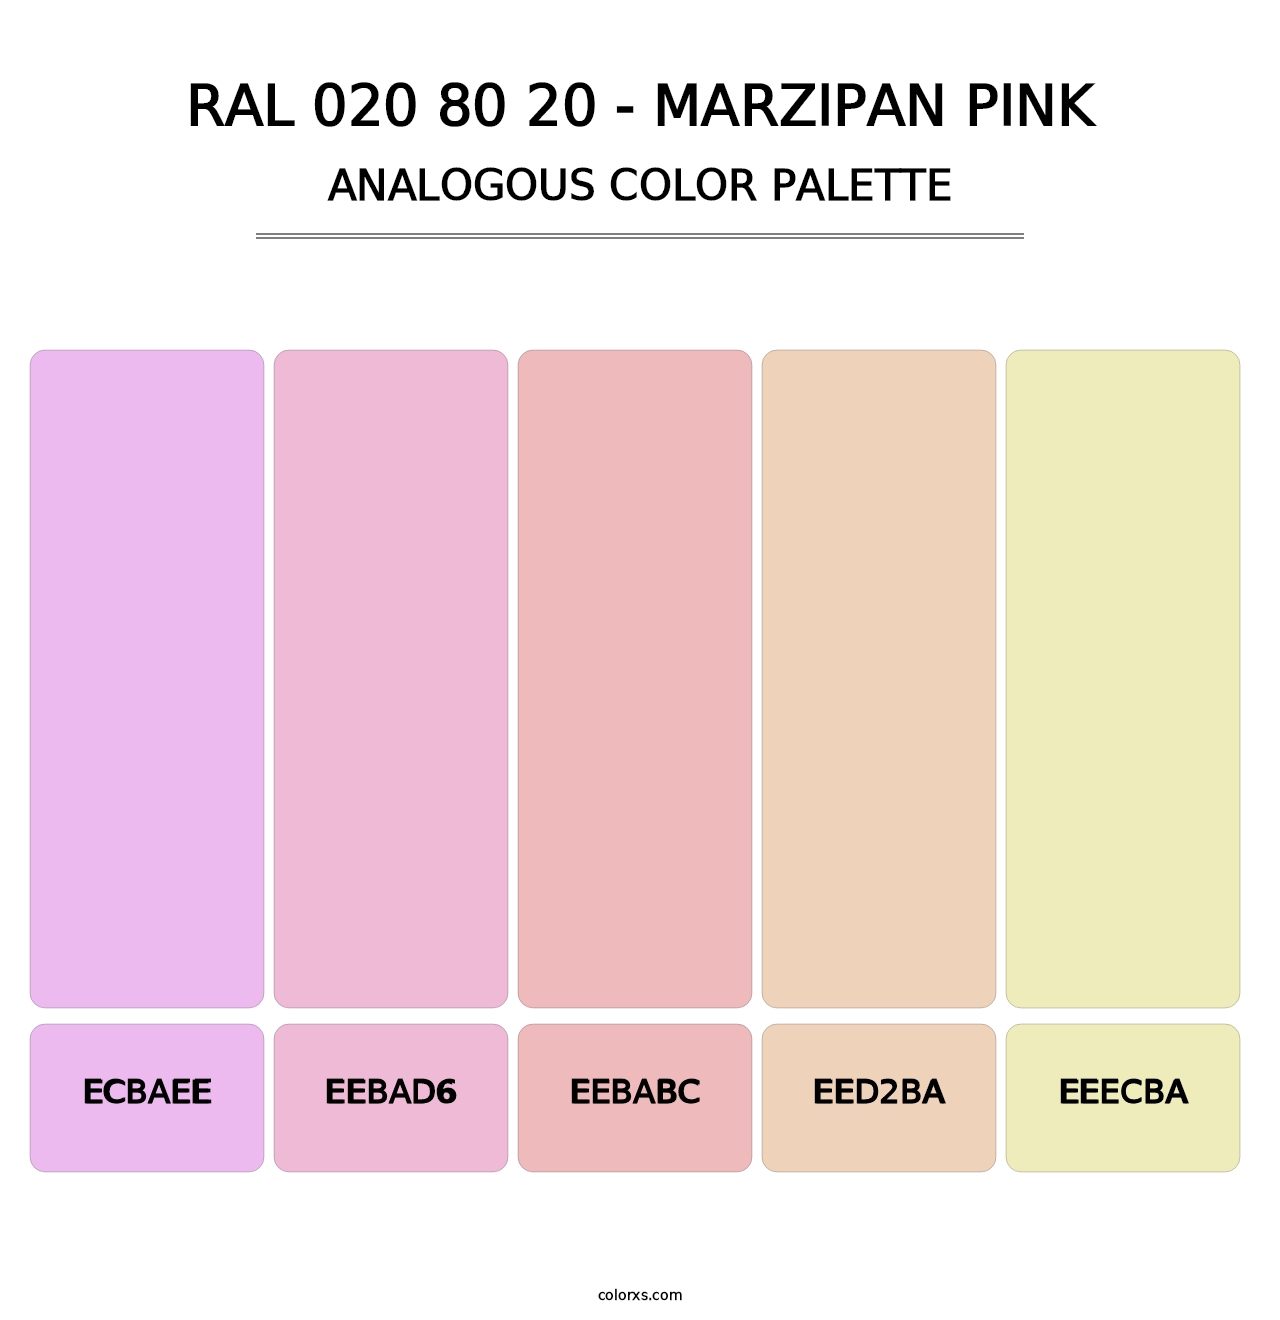 RAL 020 80 20 - Marzipan Pink - Analogous Color Palette